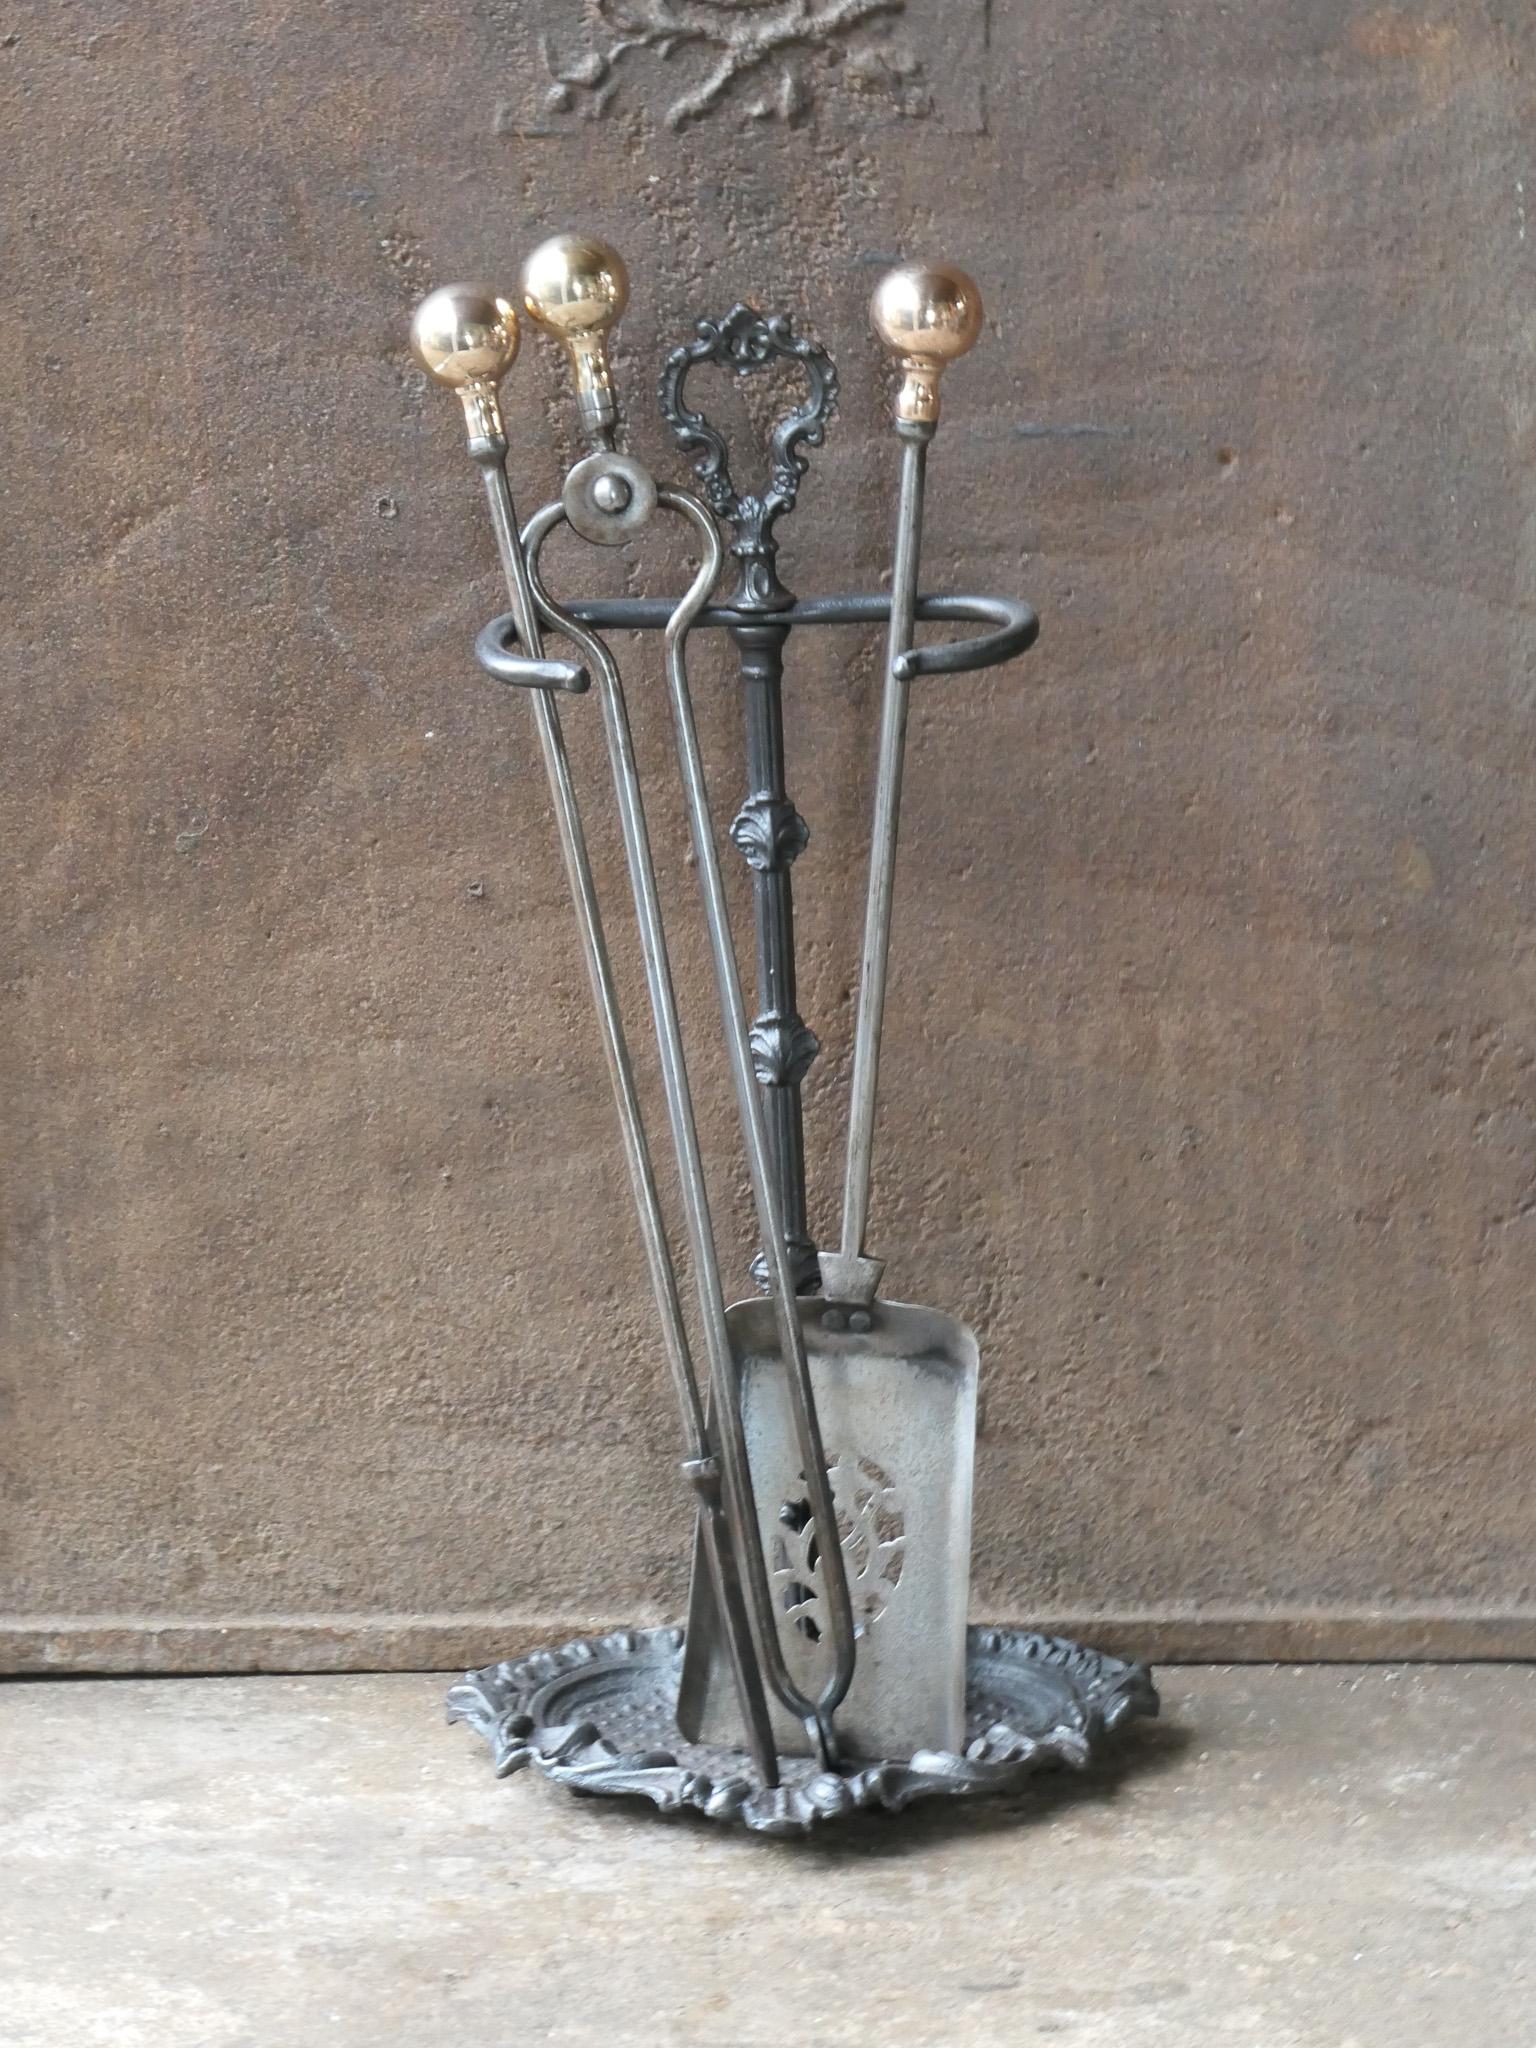 19th century English Victorian period fireplace toolset. The tools are made of wrought iron and copper and the stand of cast iron. The toolset consists of tongs, shovel, poker and stand. The condition is good.








.